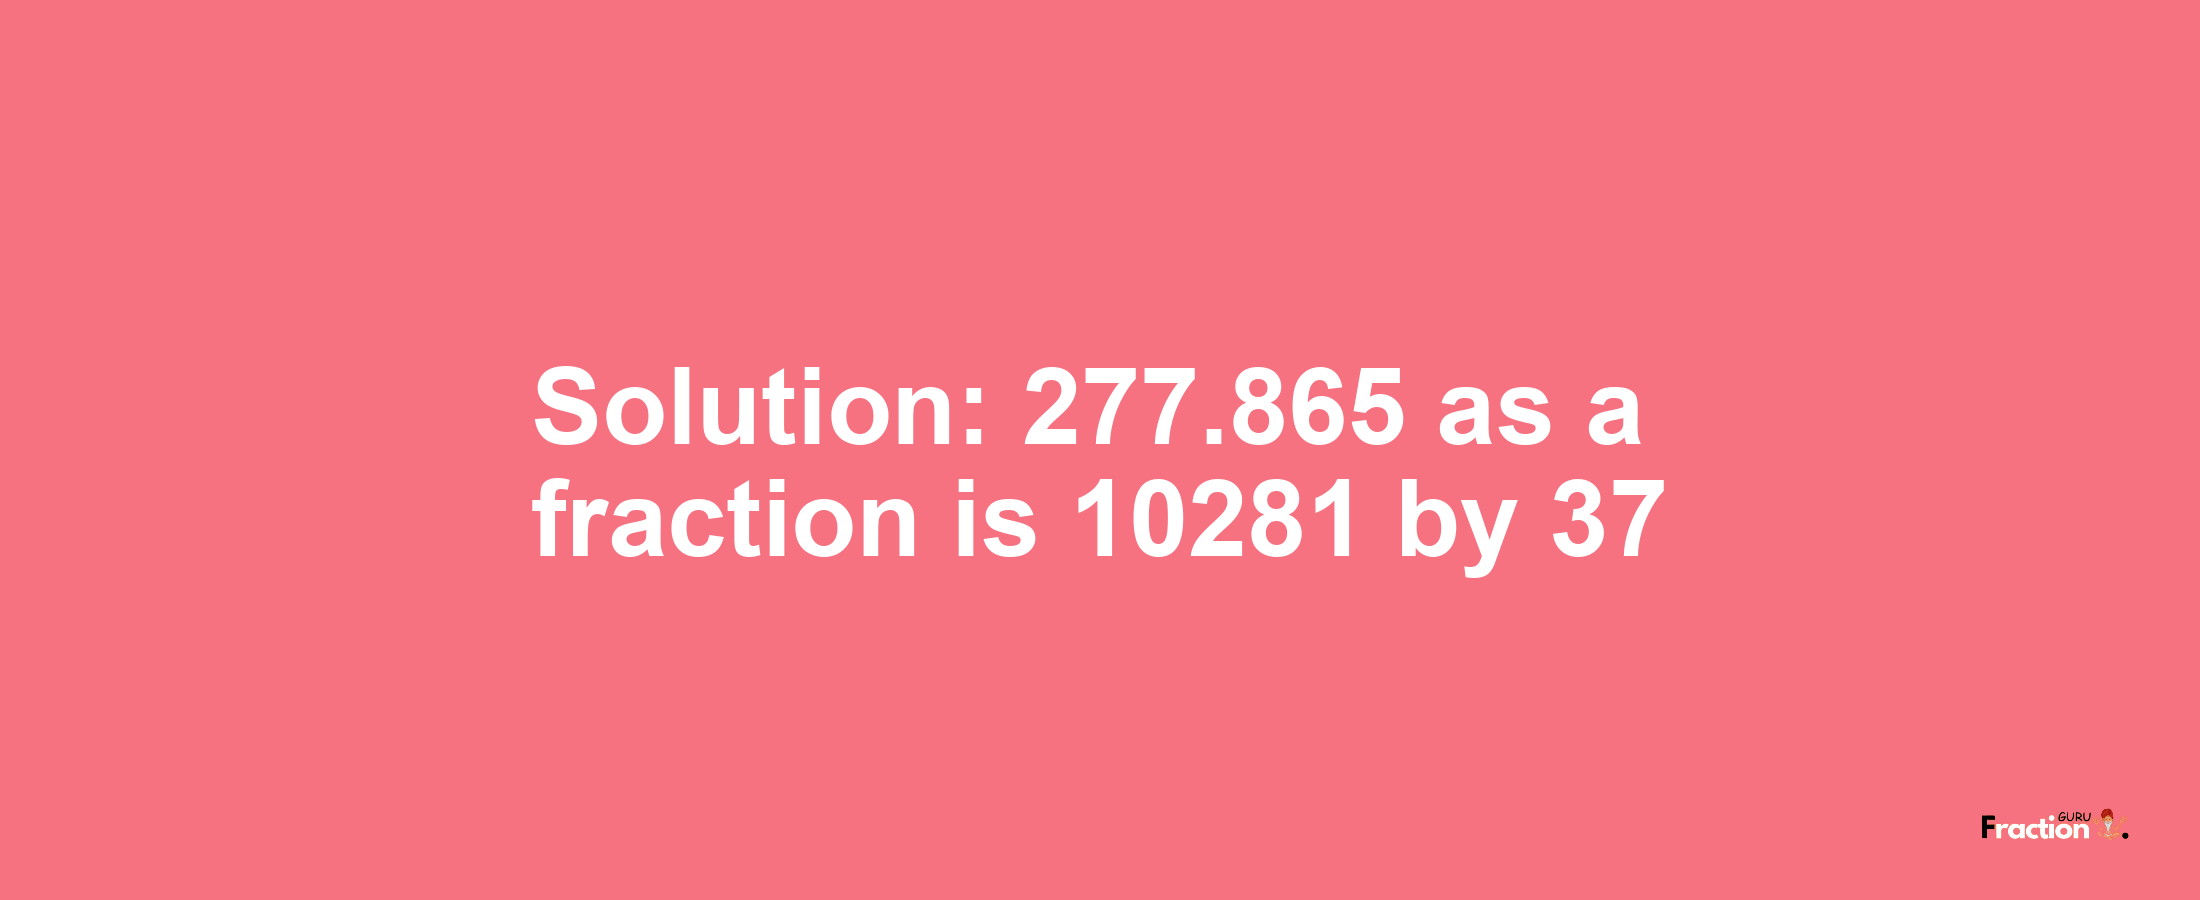 Solution:277.865 as a fraction is 10281/37